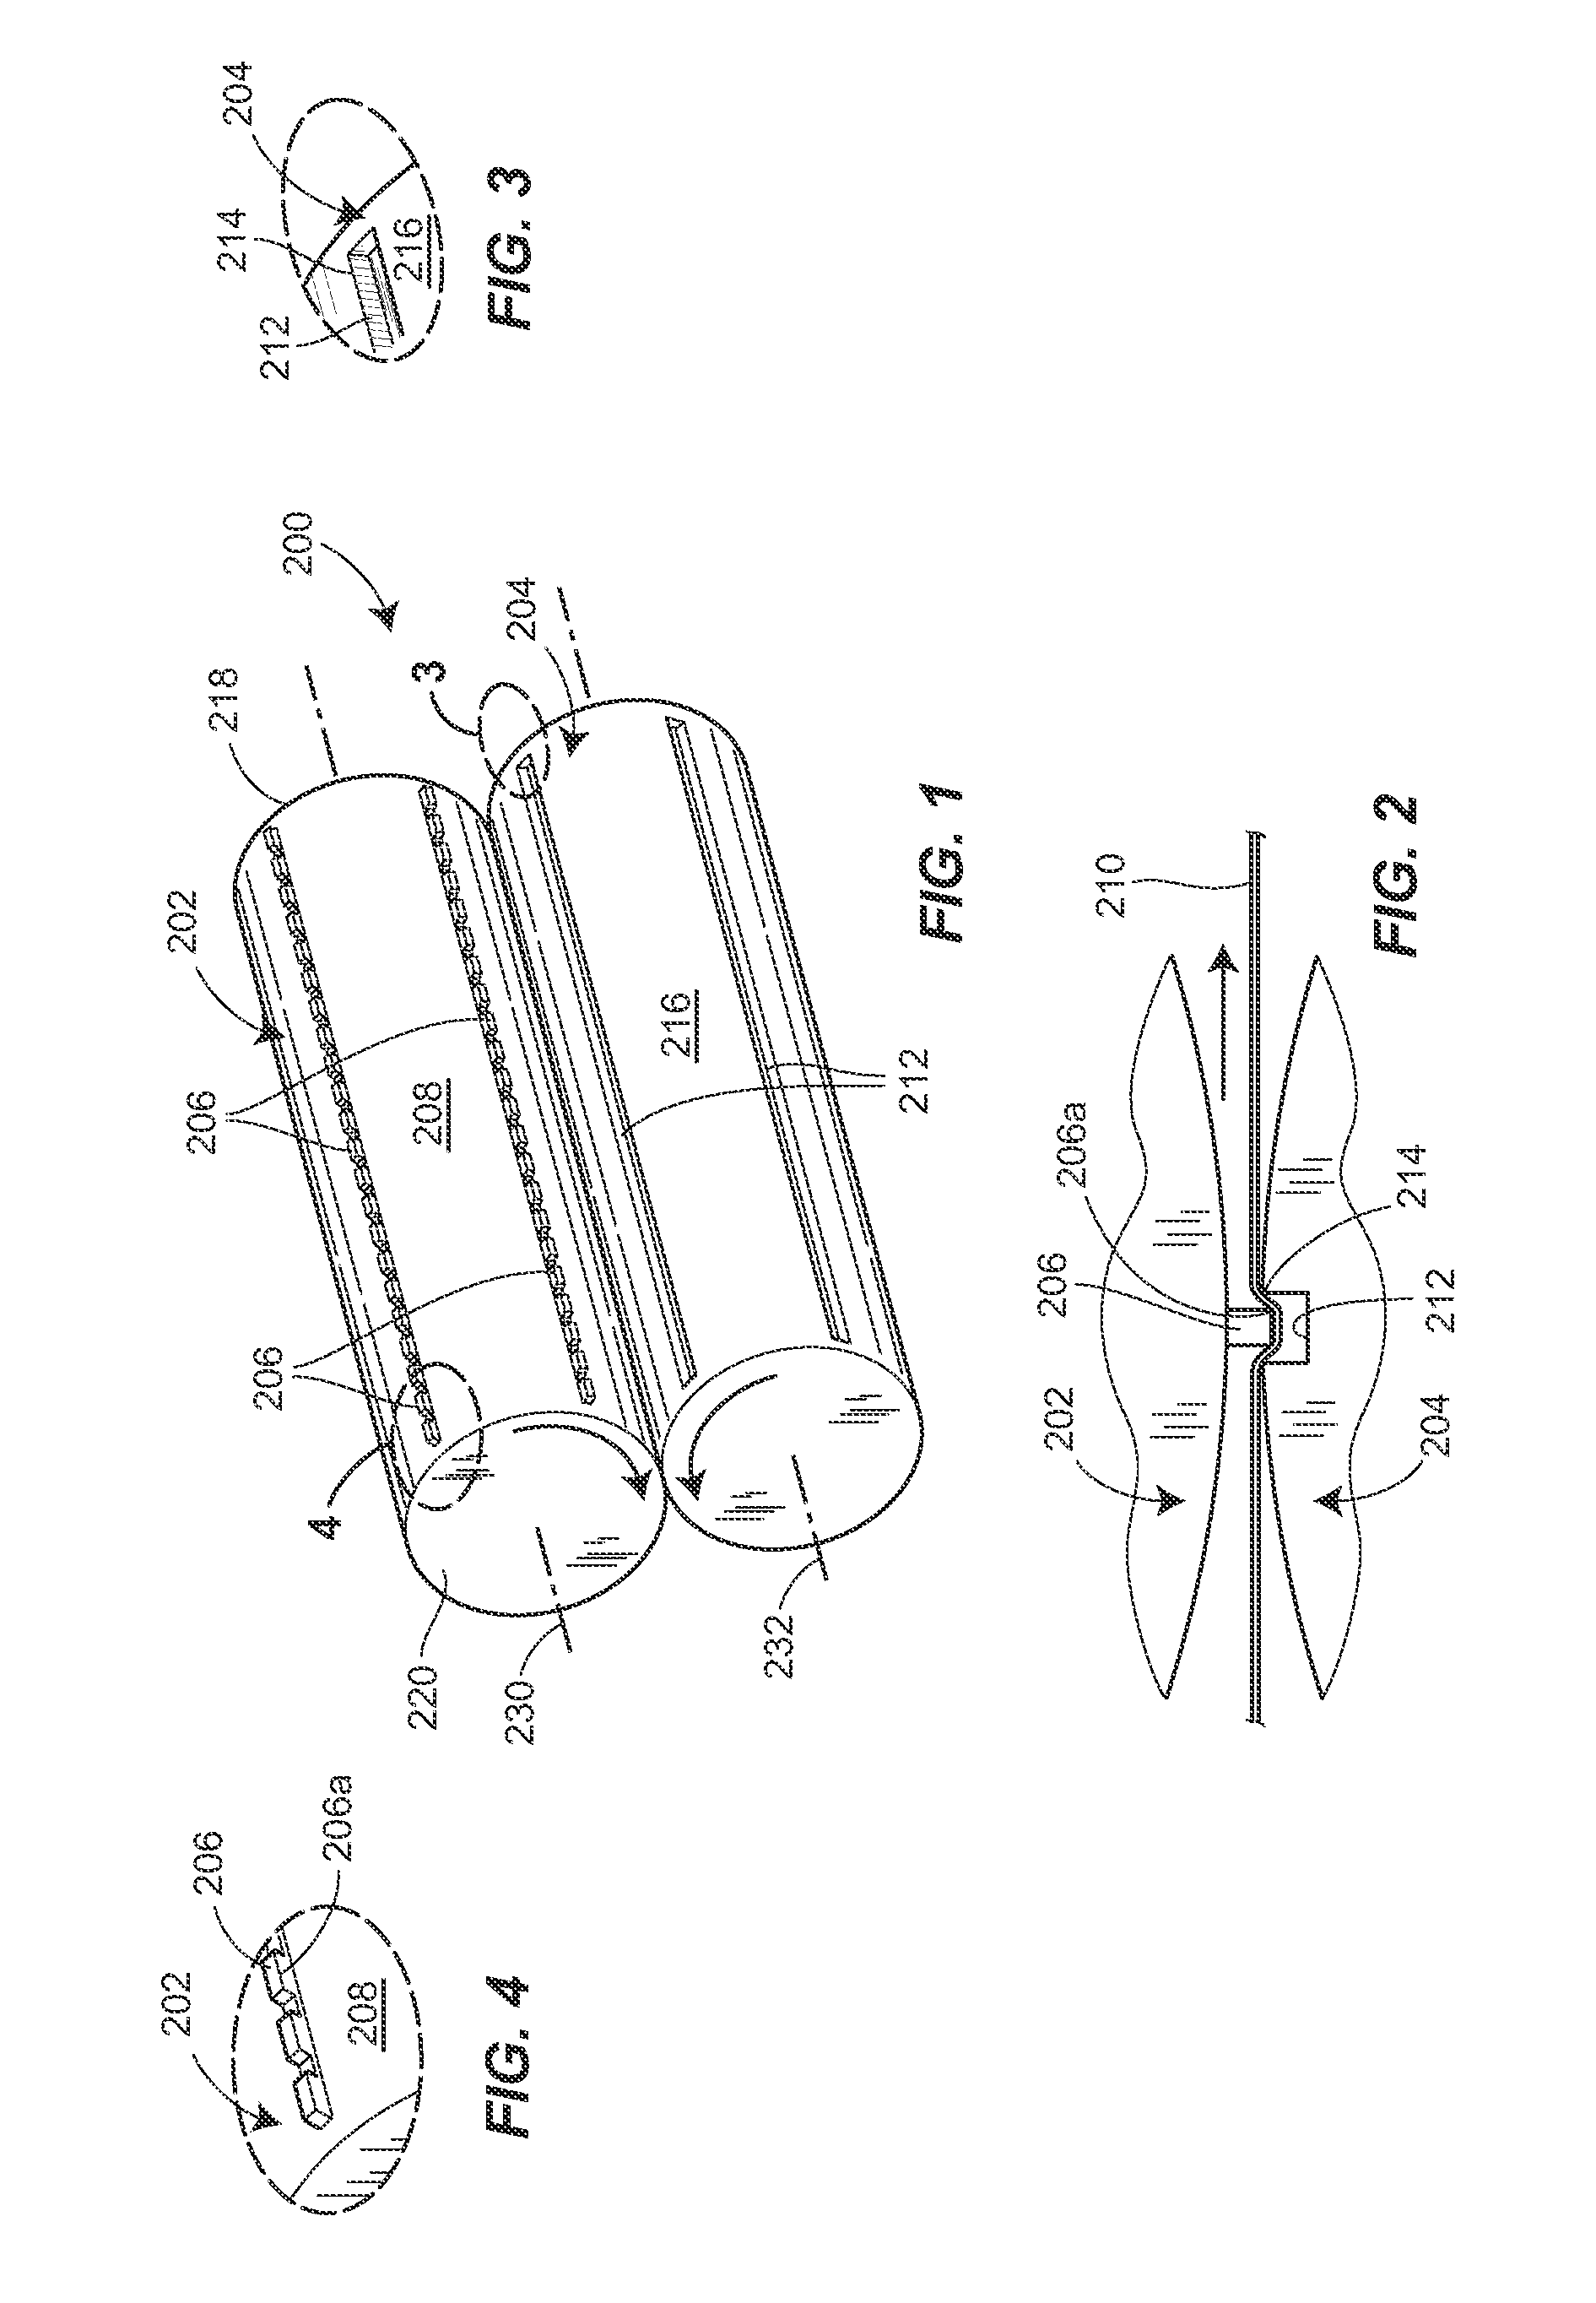 Method of perforating a web material